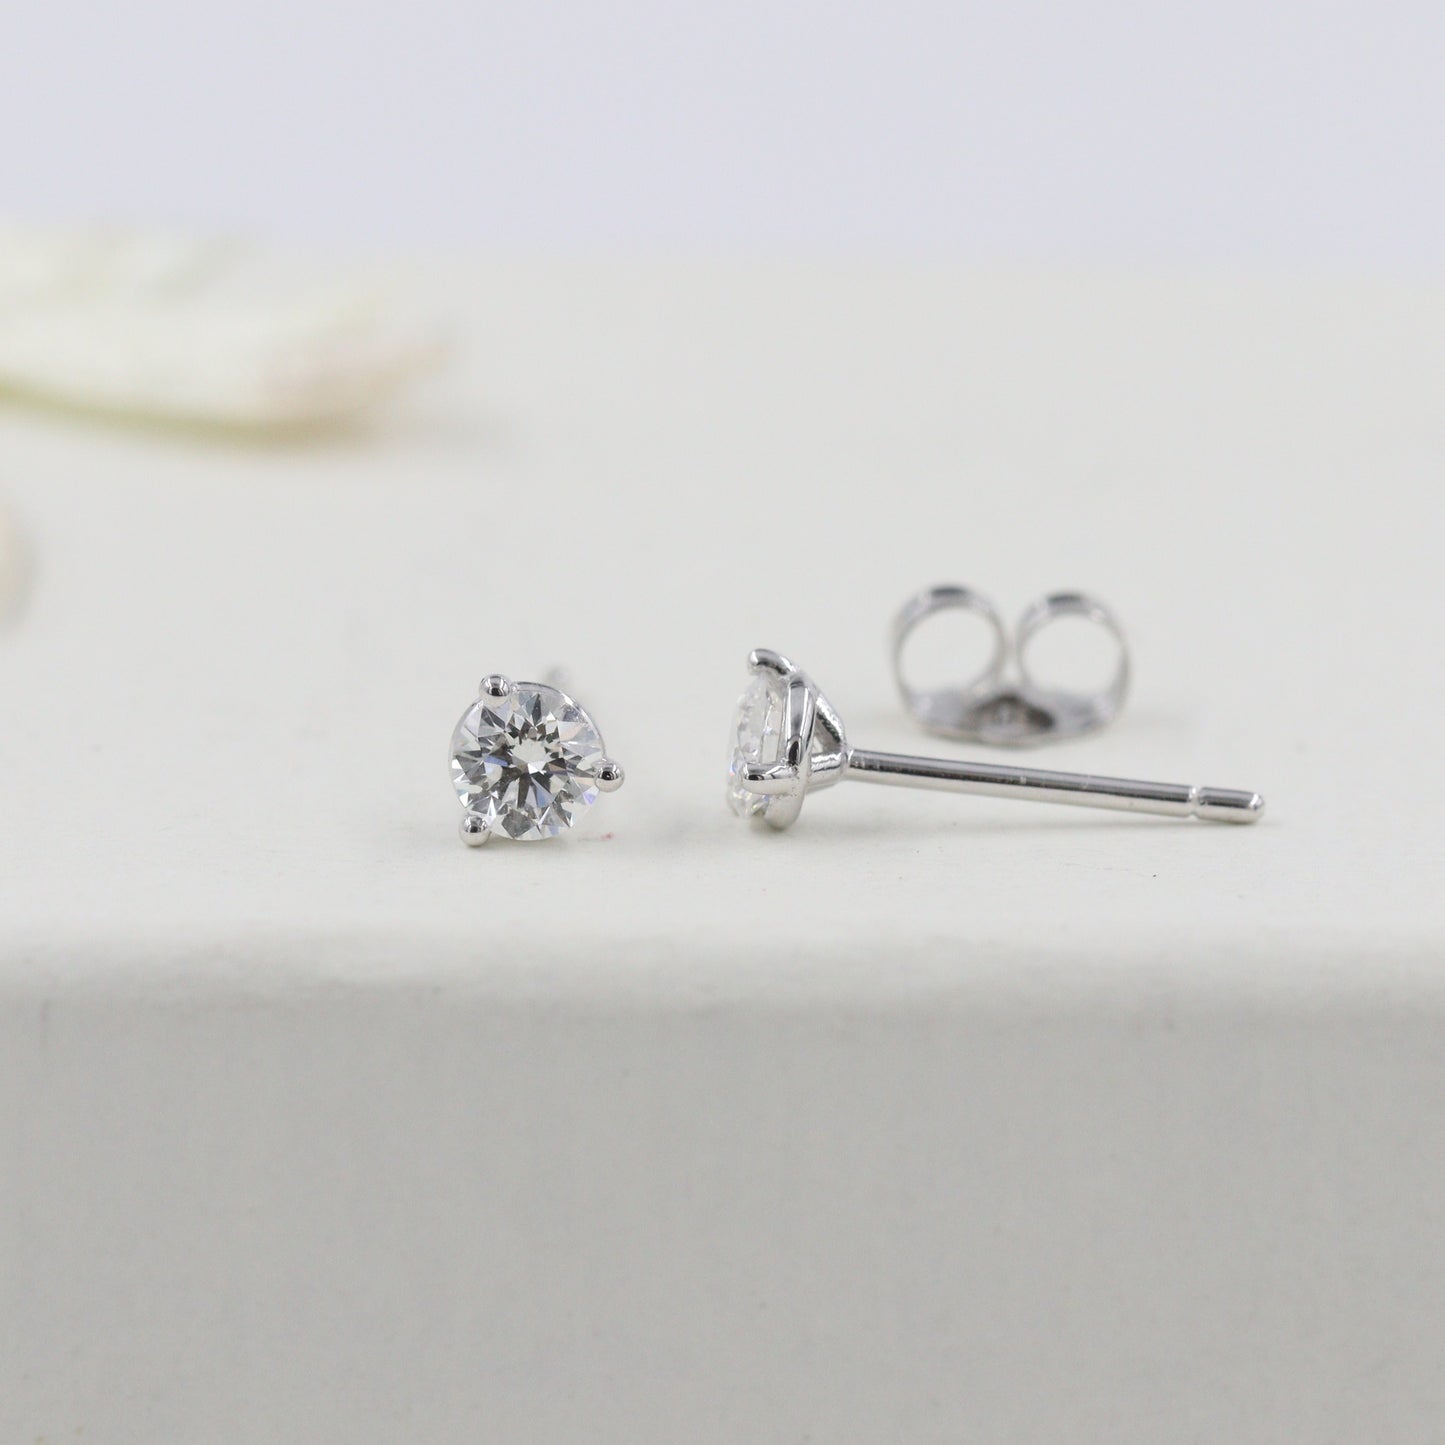 Solitaire Natural Diamond Earring/Three Prong Set Diamond Earrings/Stud Earring/Solitaire Stud Earrings/Dainty Simple Earrings/Gifts for her